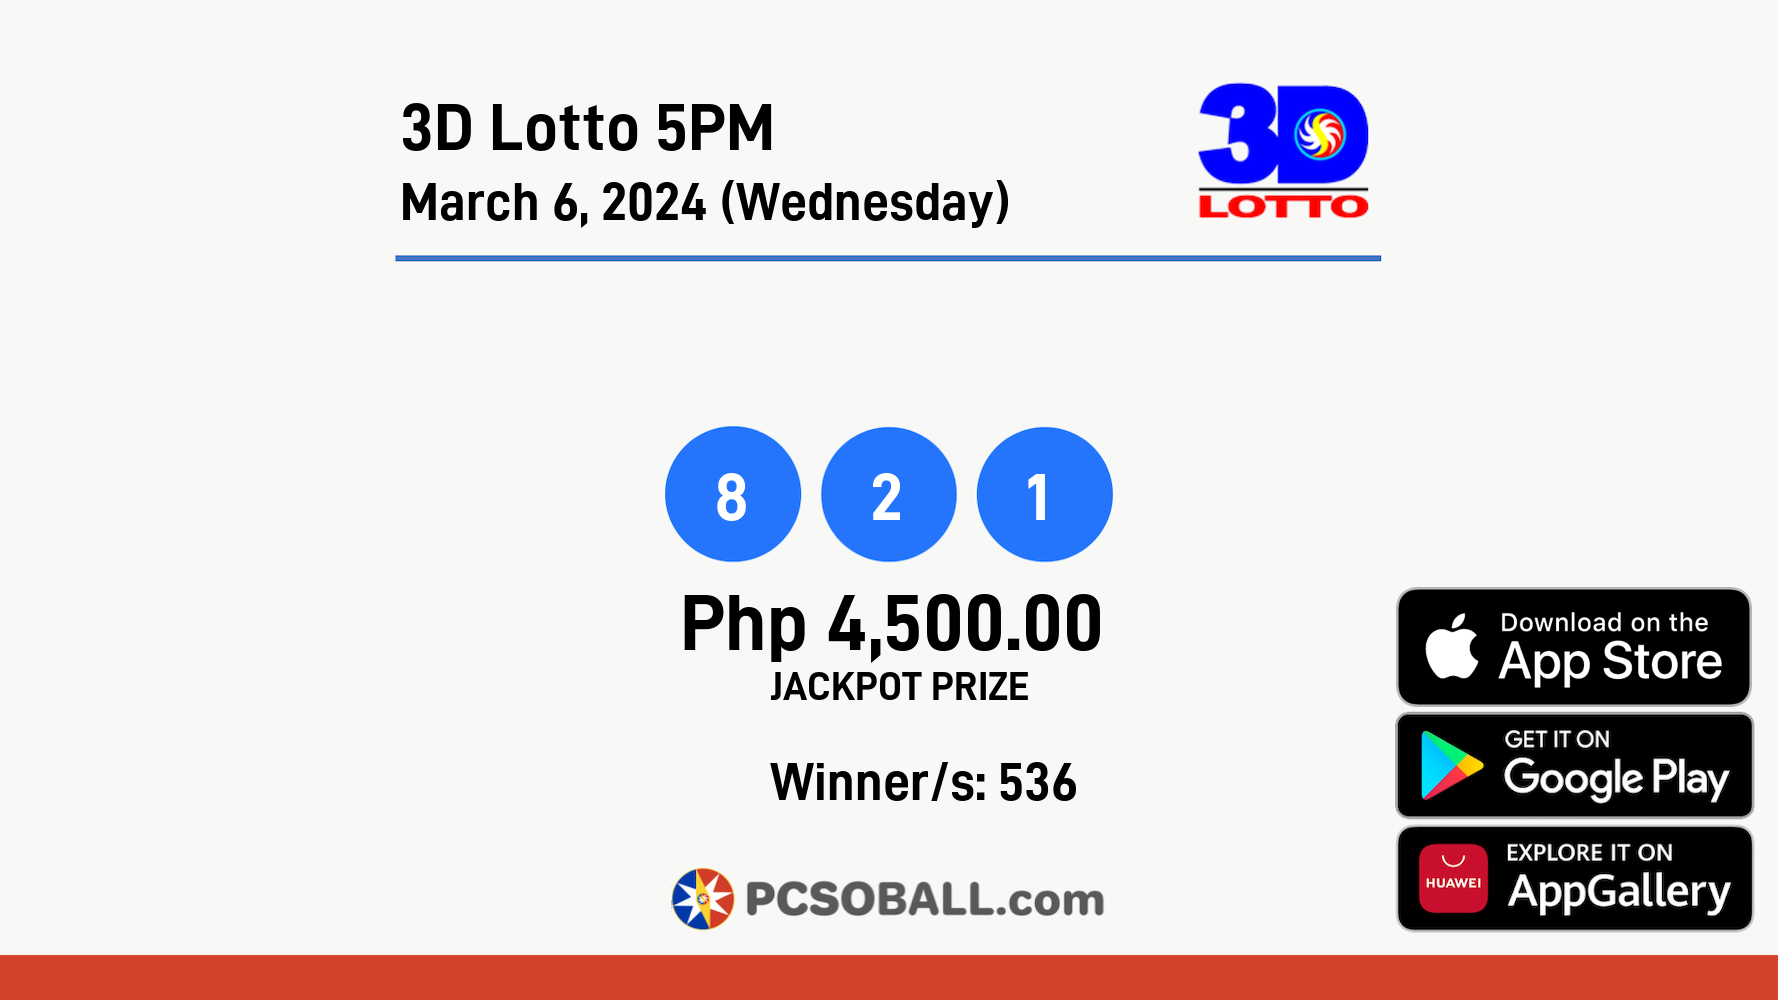 3D Lotto 5PM March 6, 2024 (Wednesday) Result